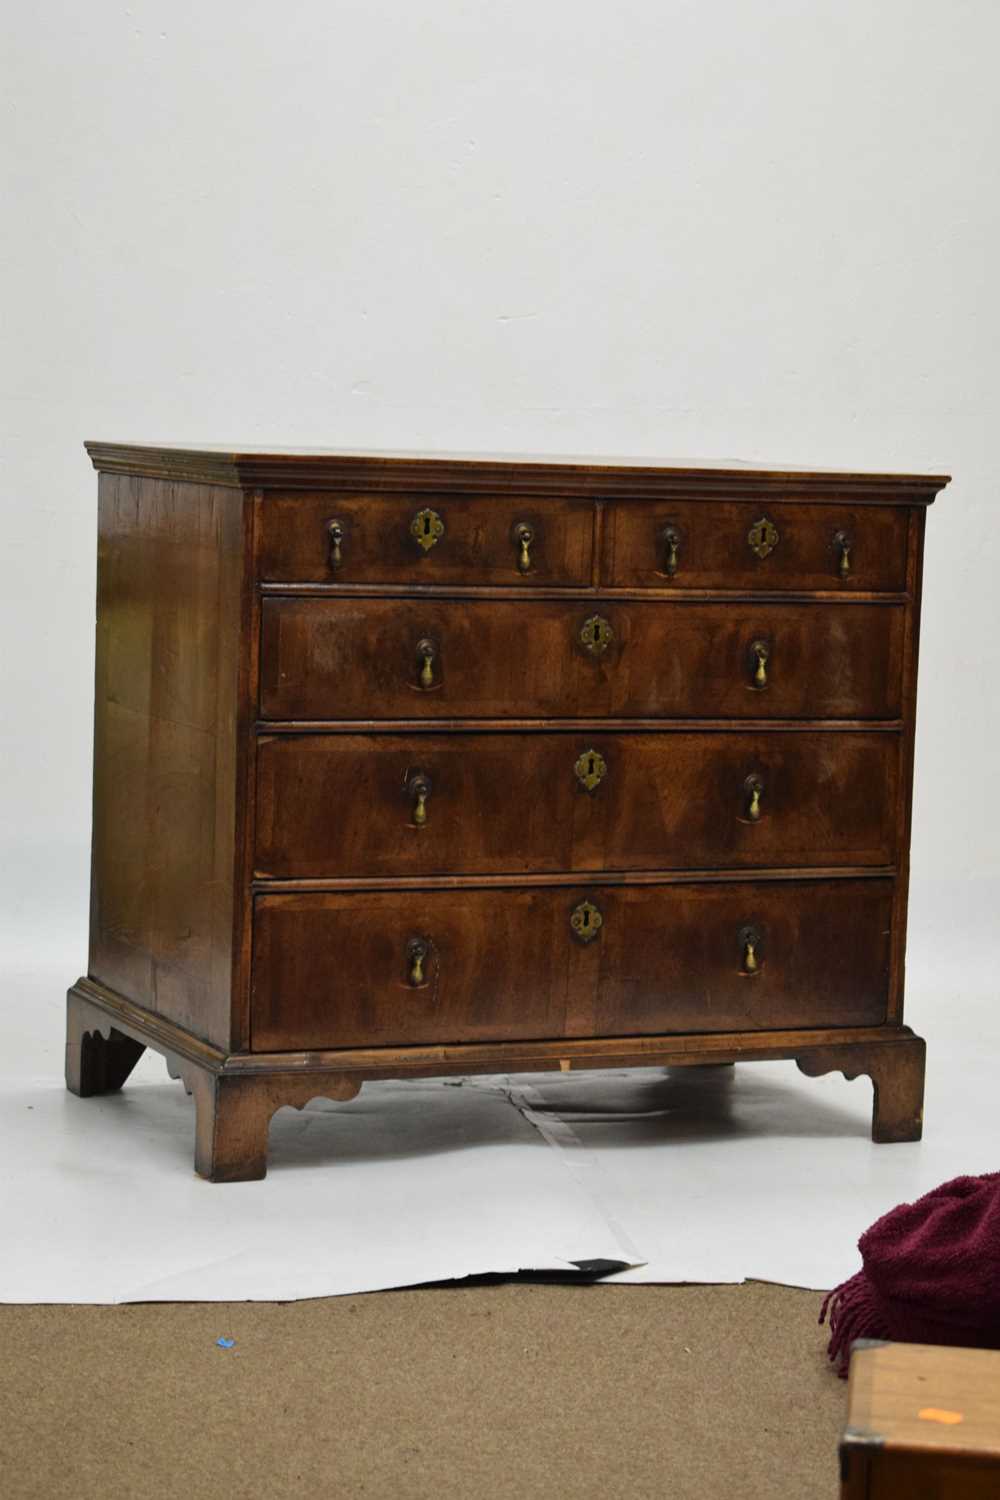 Early 18th century walnut chest of drawers - Image 20 of 20